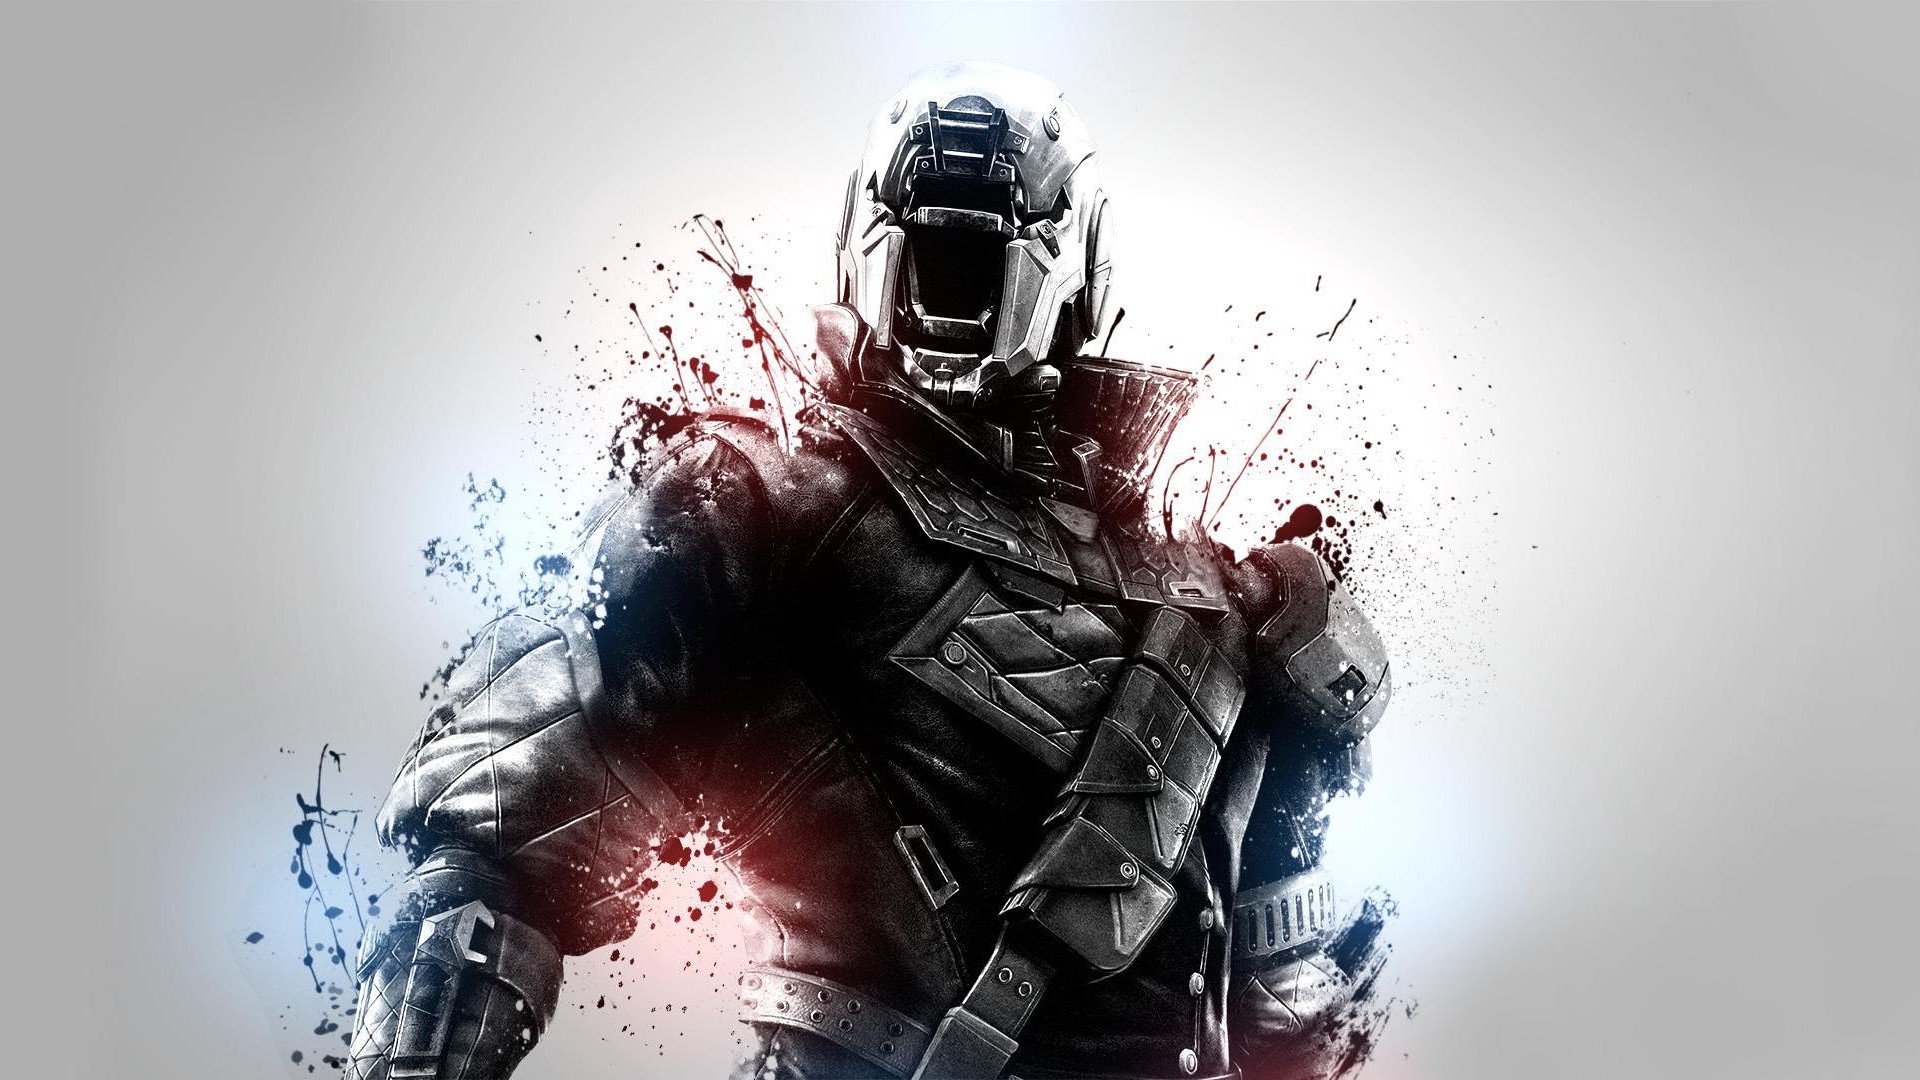 General 1920x1080 video games Destiny (video game) PC gaming video game art science fiction armor blood blood spatter simple background